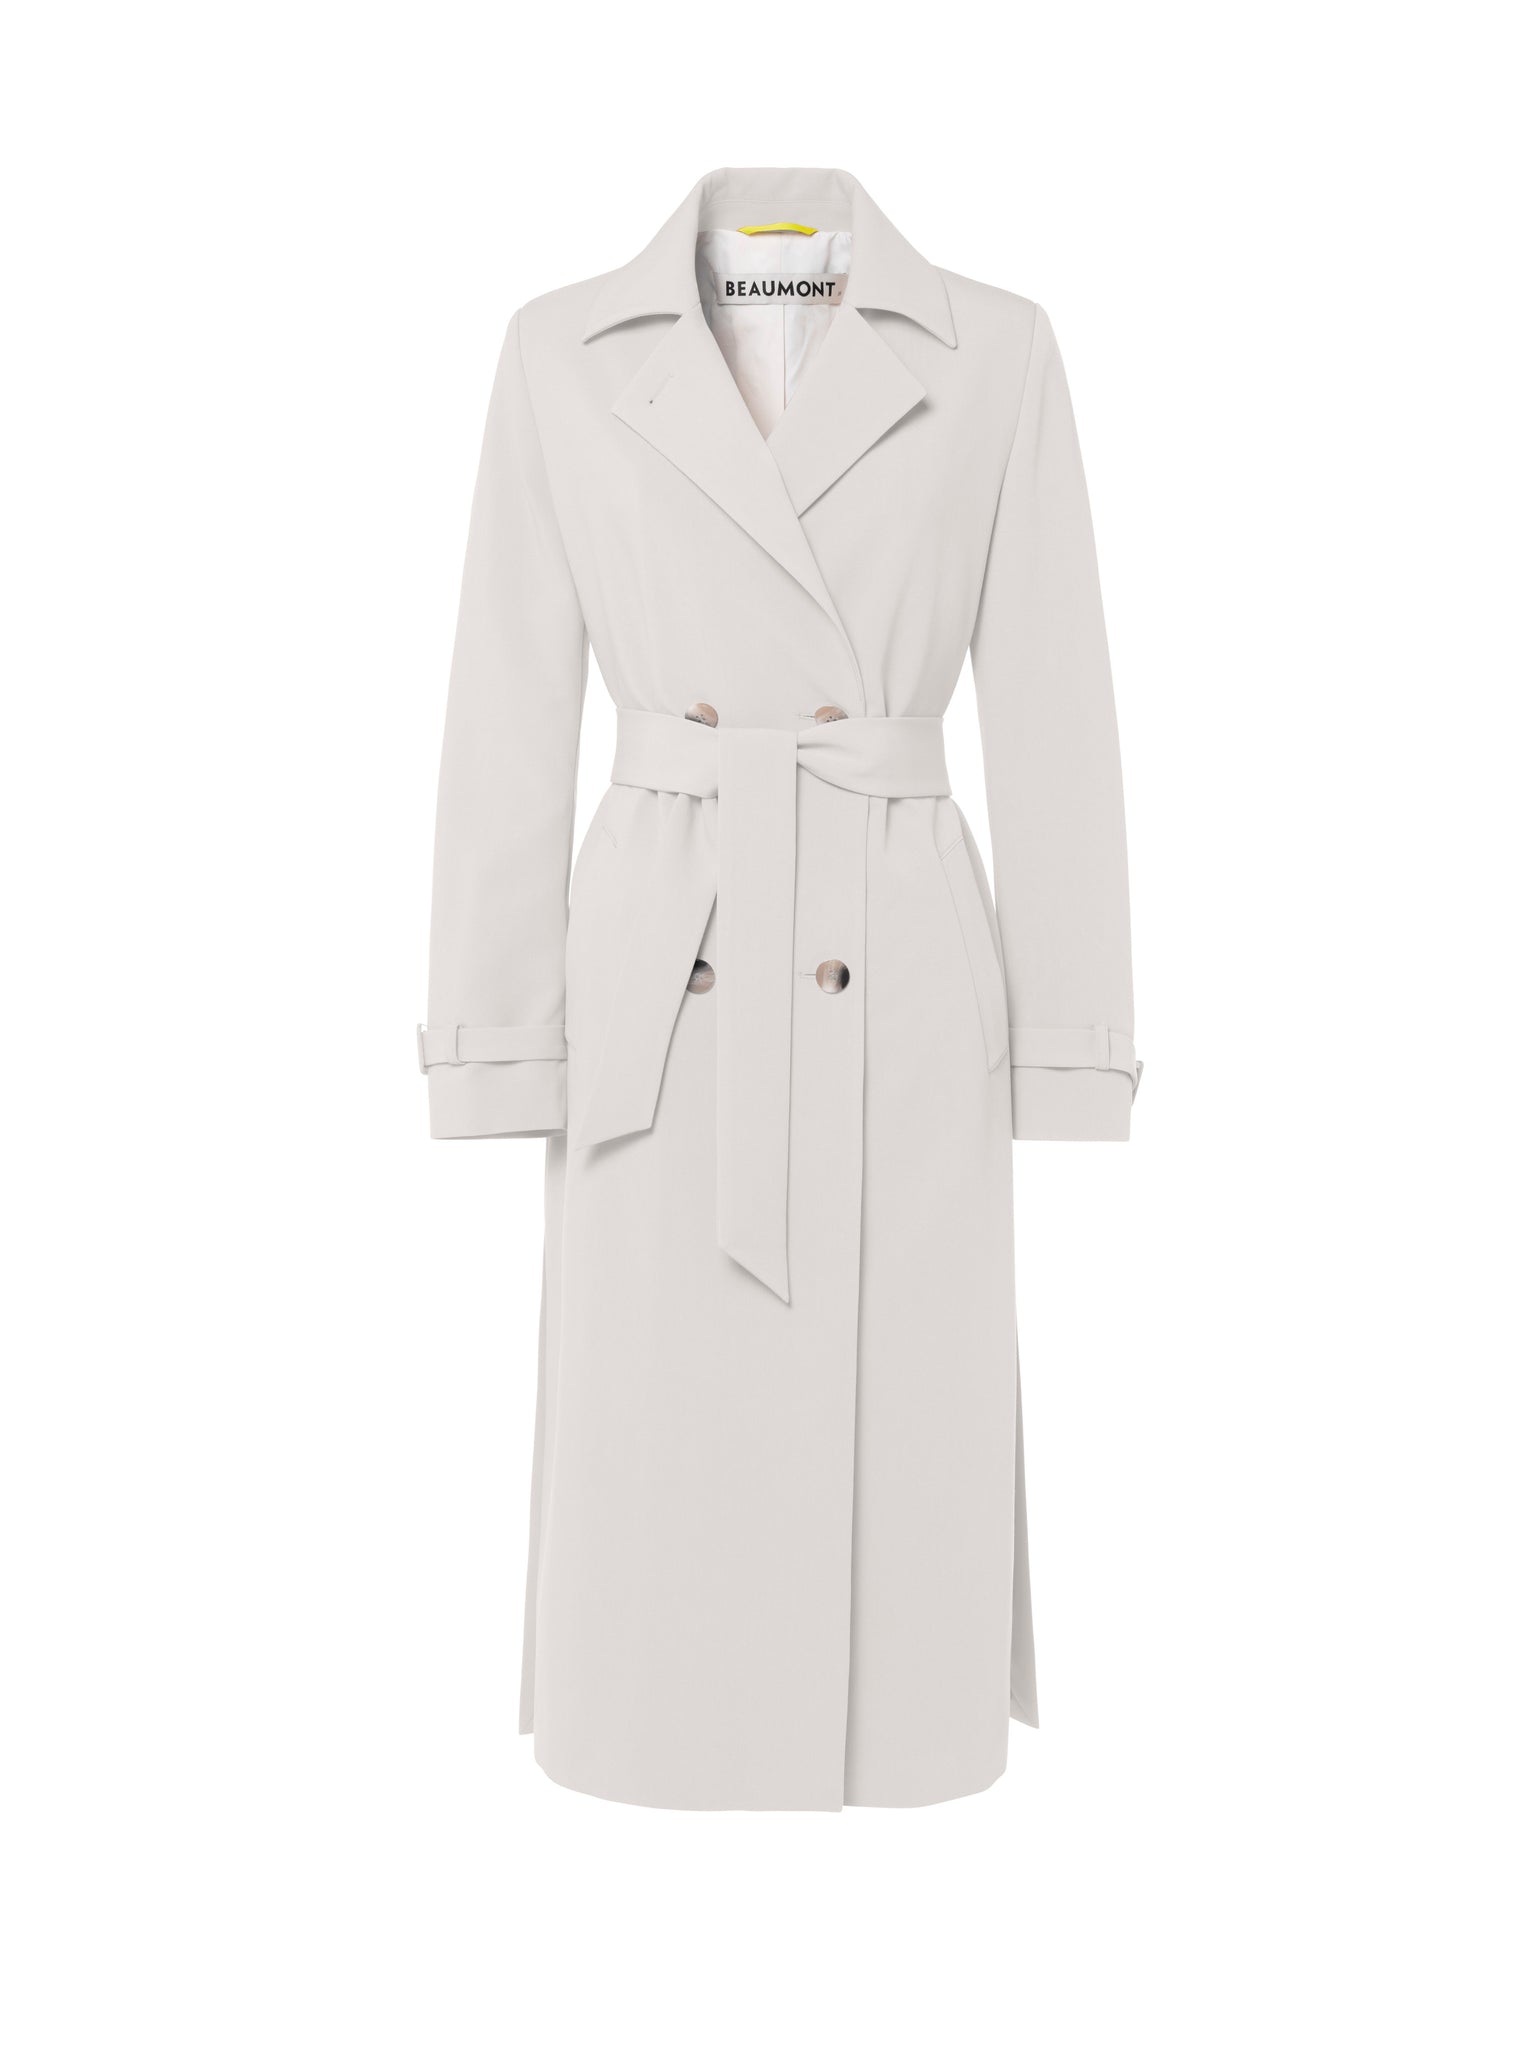 Beaumont Dia tailored double breasted trench coat with side splits